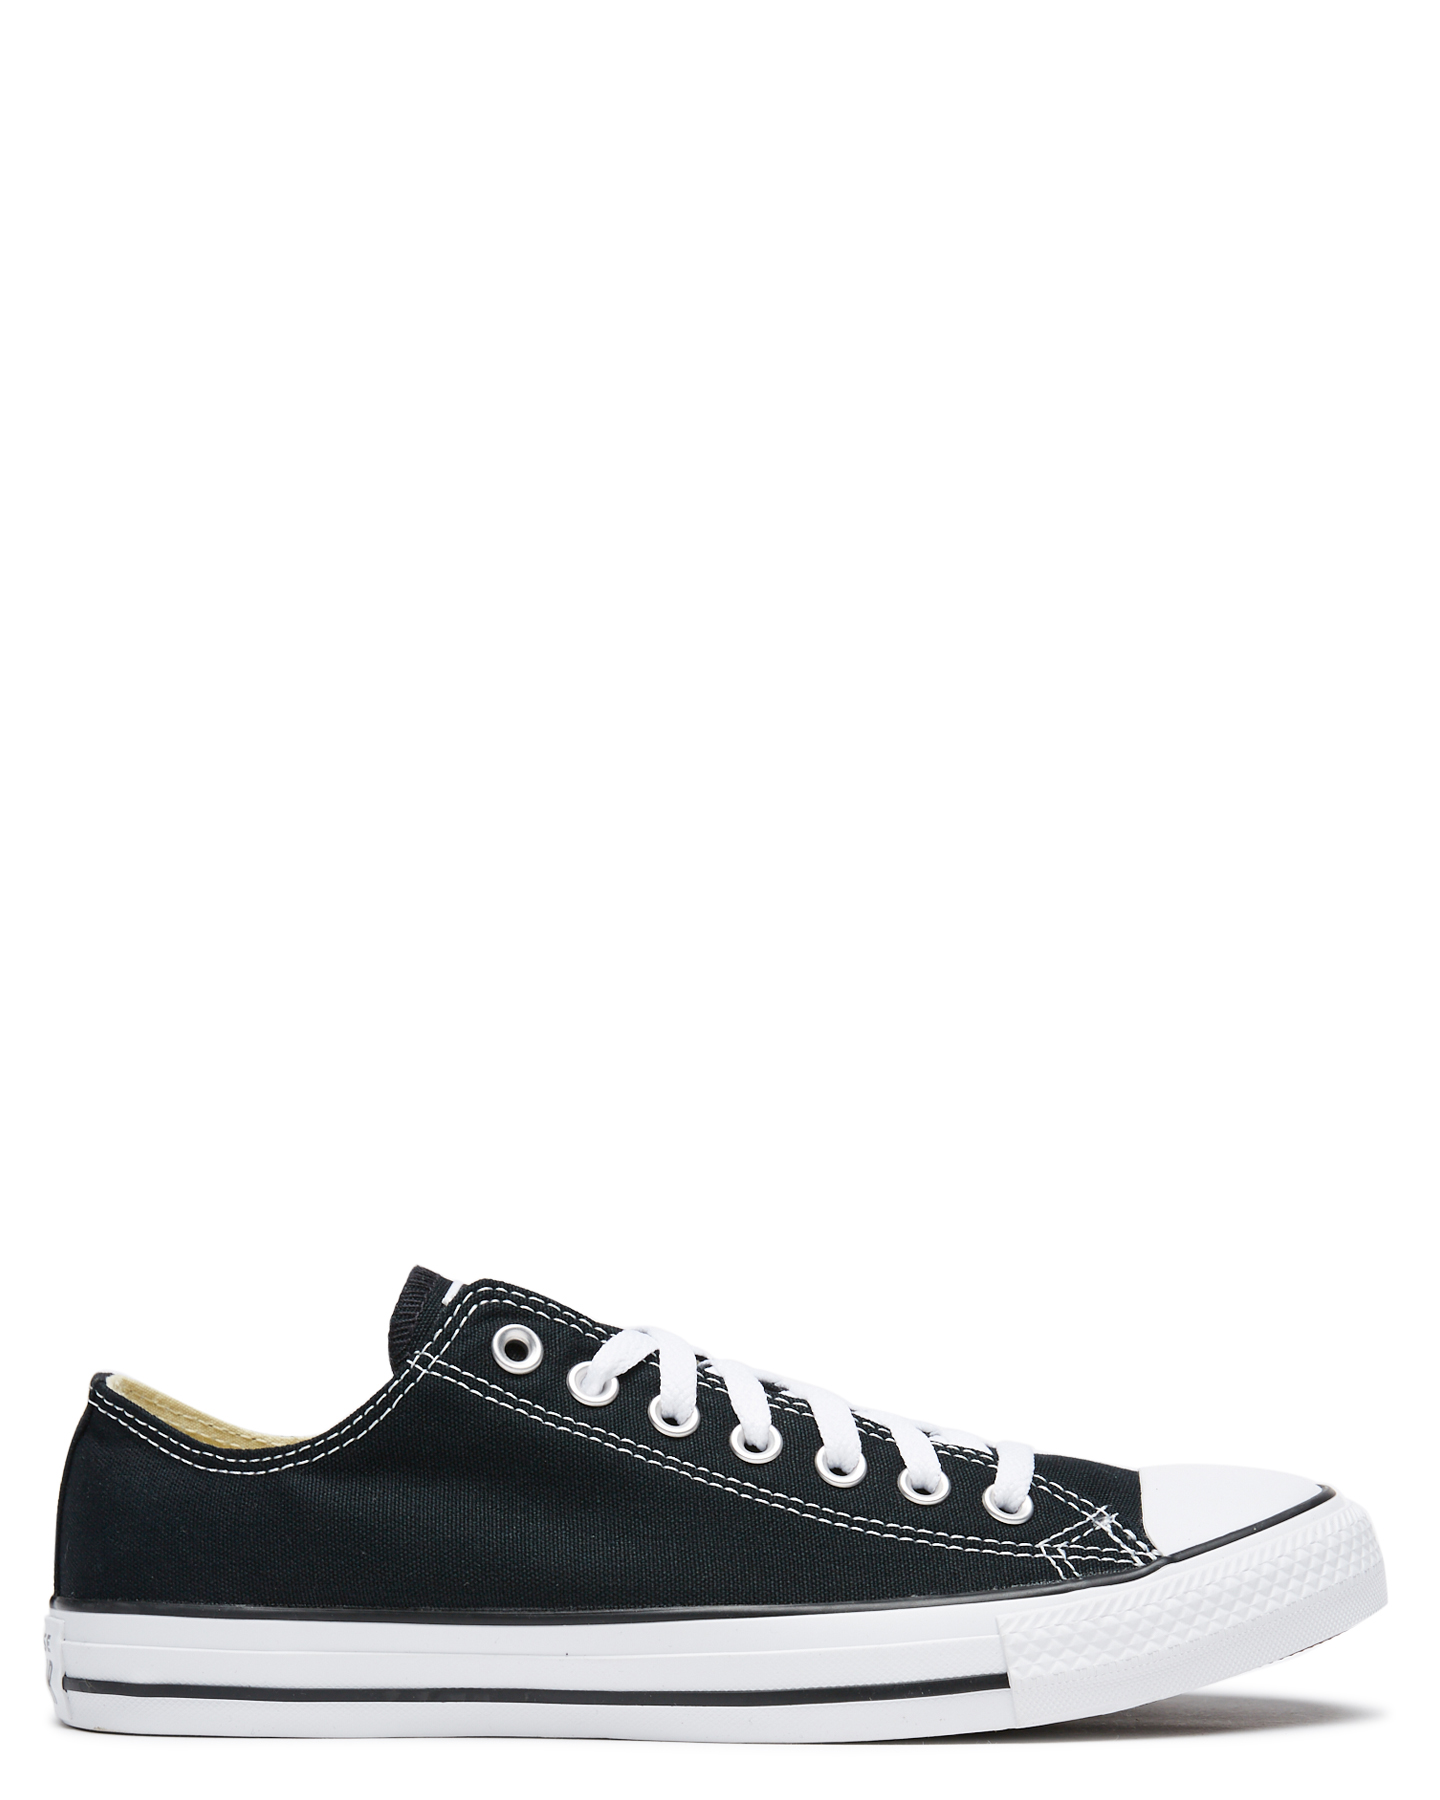 women's converse all star shoes